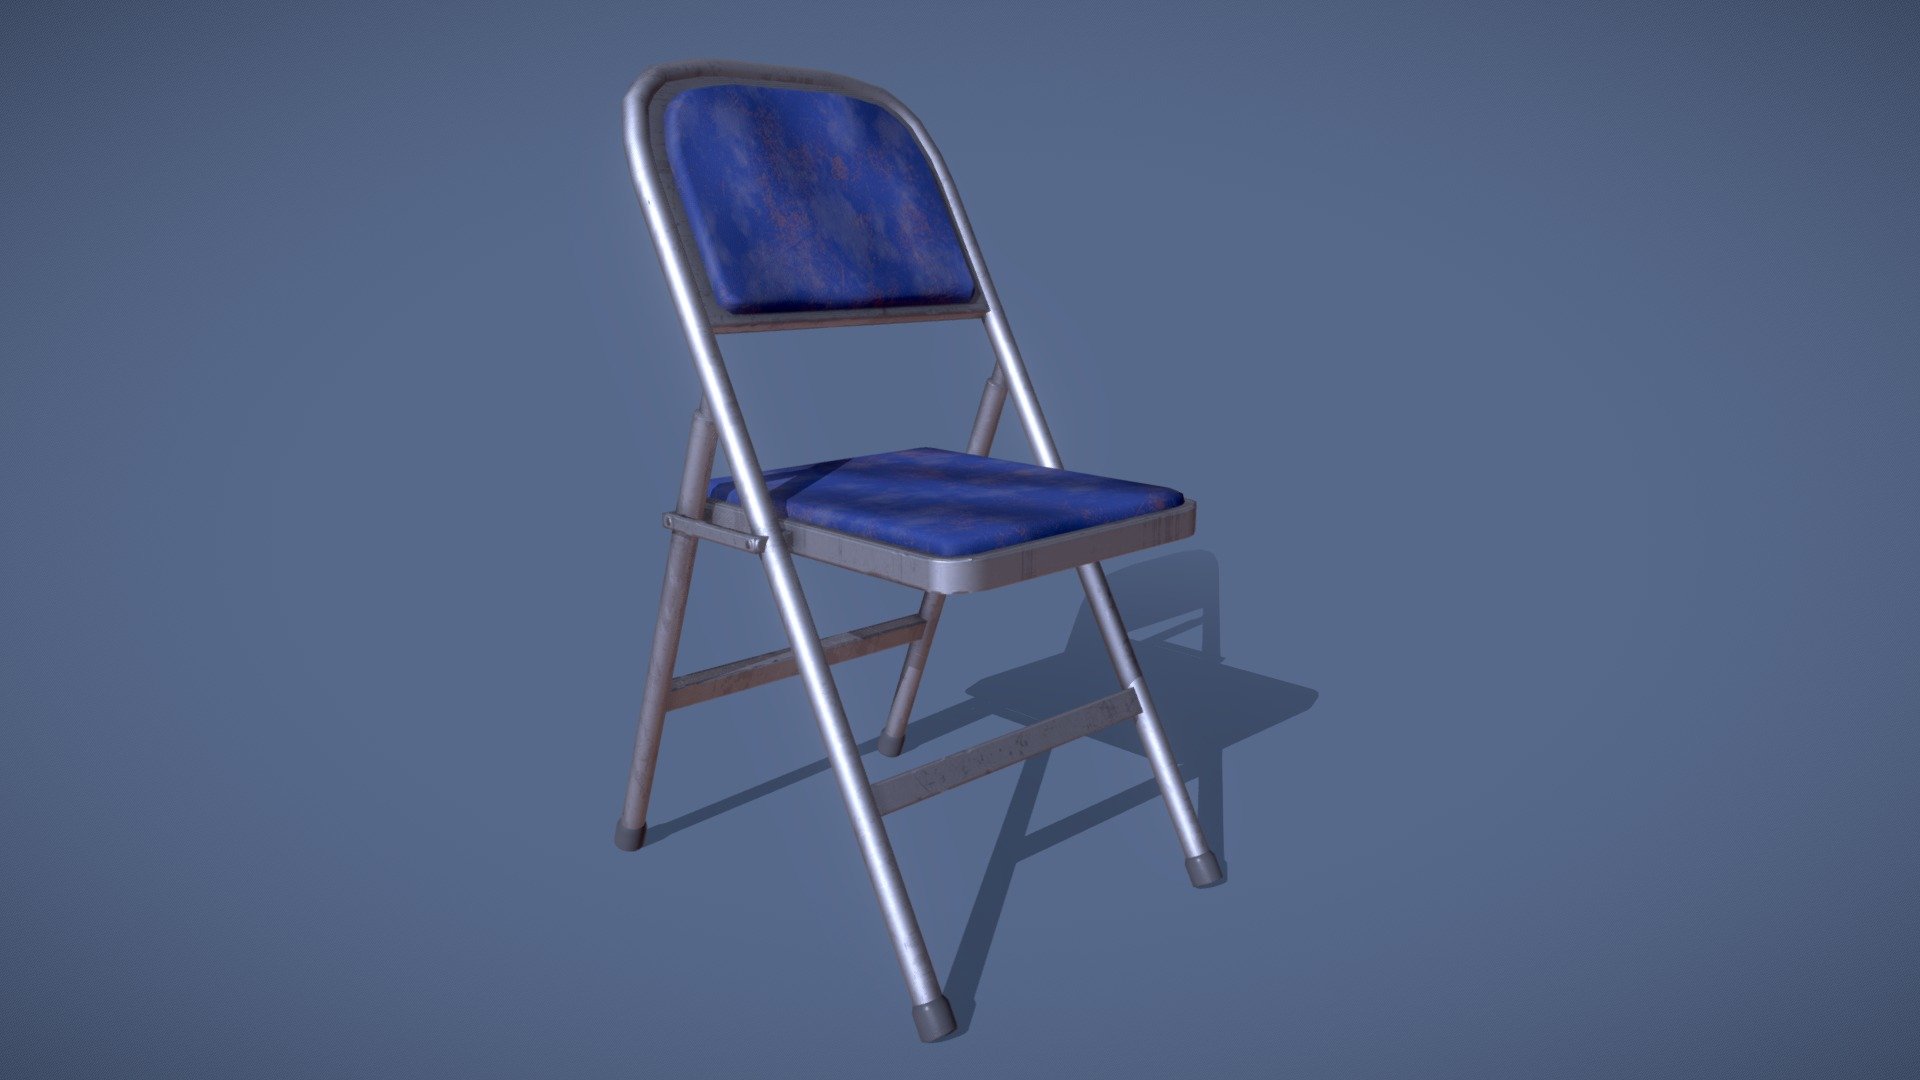 A metal folding chair with seat and back padding. Modelled in Maya, textured using Photoshop and Substance Painter.

This model appears in my 3D environment “Hangar 13”, which can be found here: https://www.artstation.com/artwork/AGZe5

More of my work: https://www.artstation.com/theoclarke My portfolio: https://theoclarkeart.weebly.com/ - Metal Folding Chair - Download Free 3D model by TheoClarke 3d model